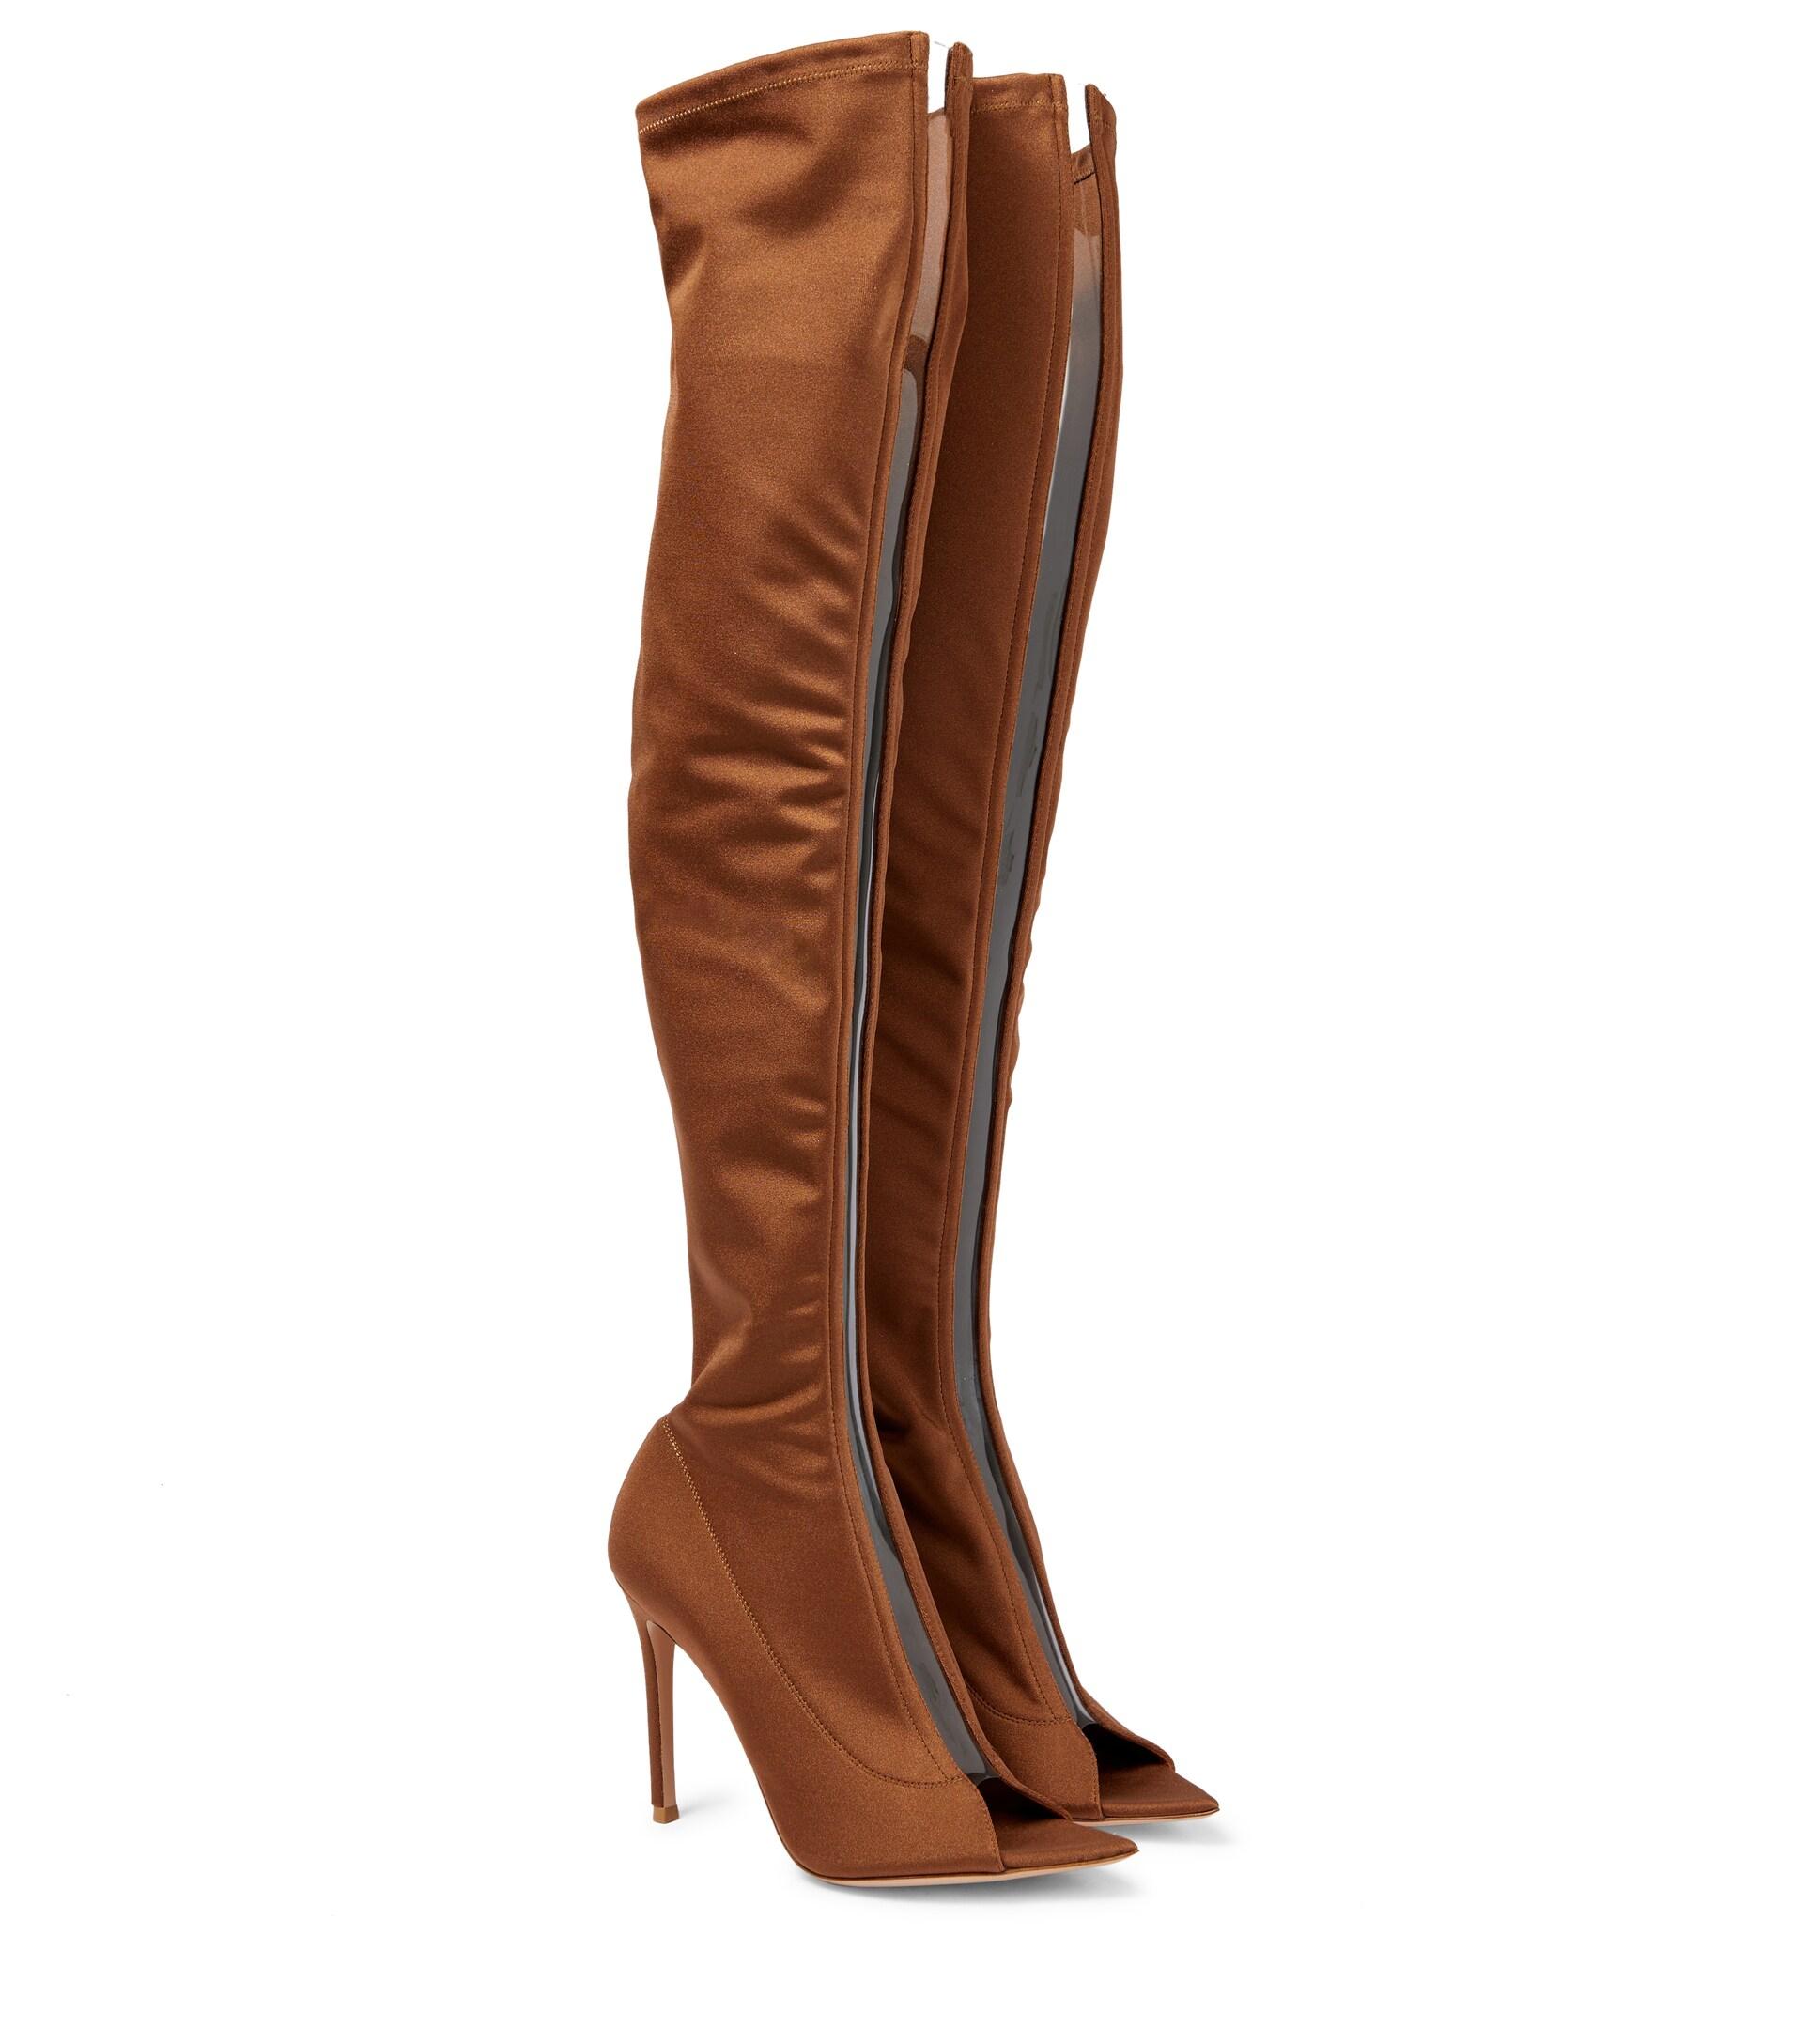 Gianvito Rossi Hiroko 105 Over-the-knee Boots in Brown | Lyst